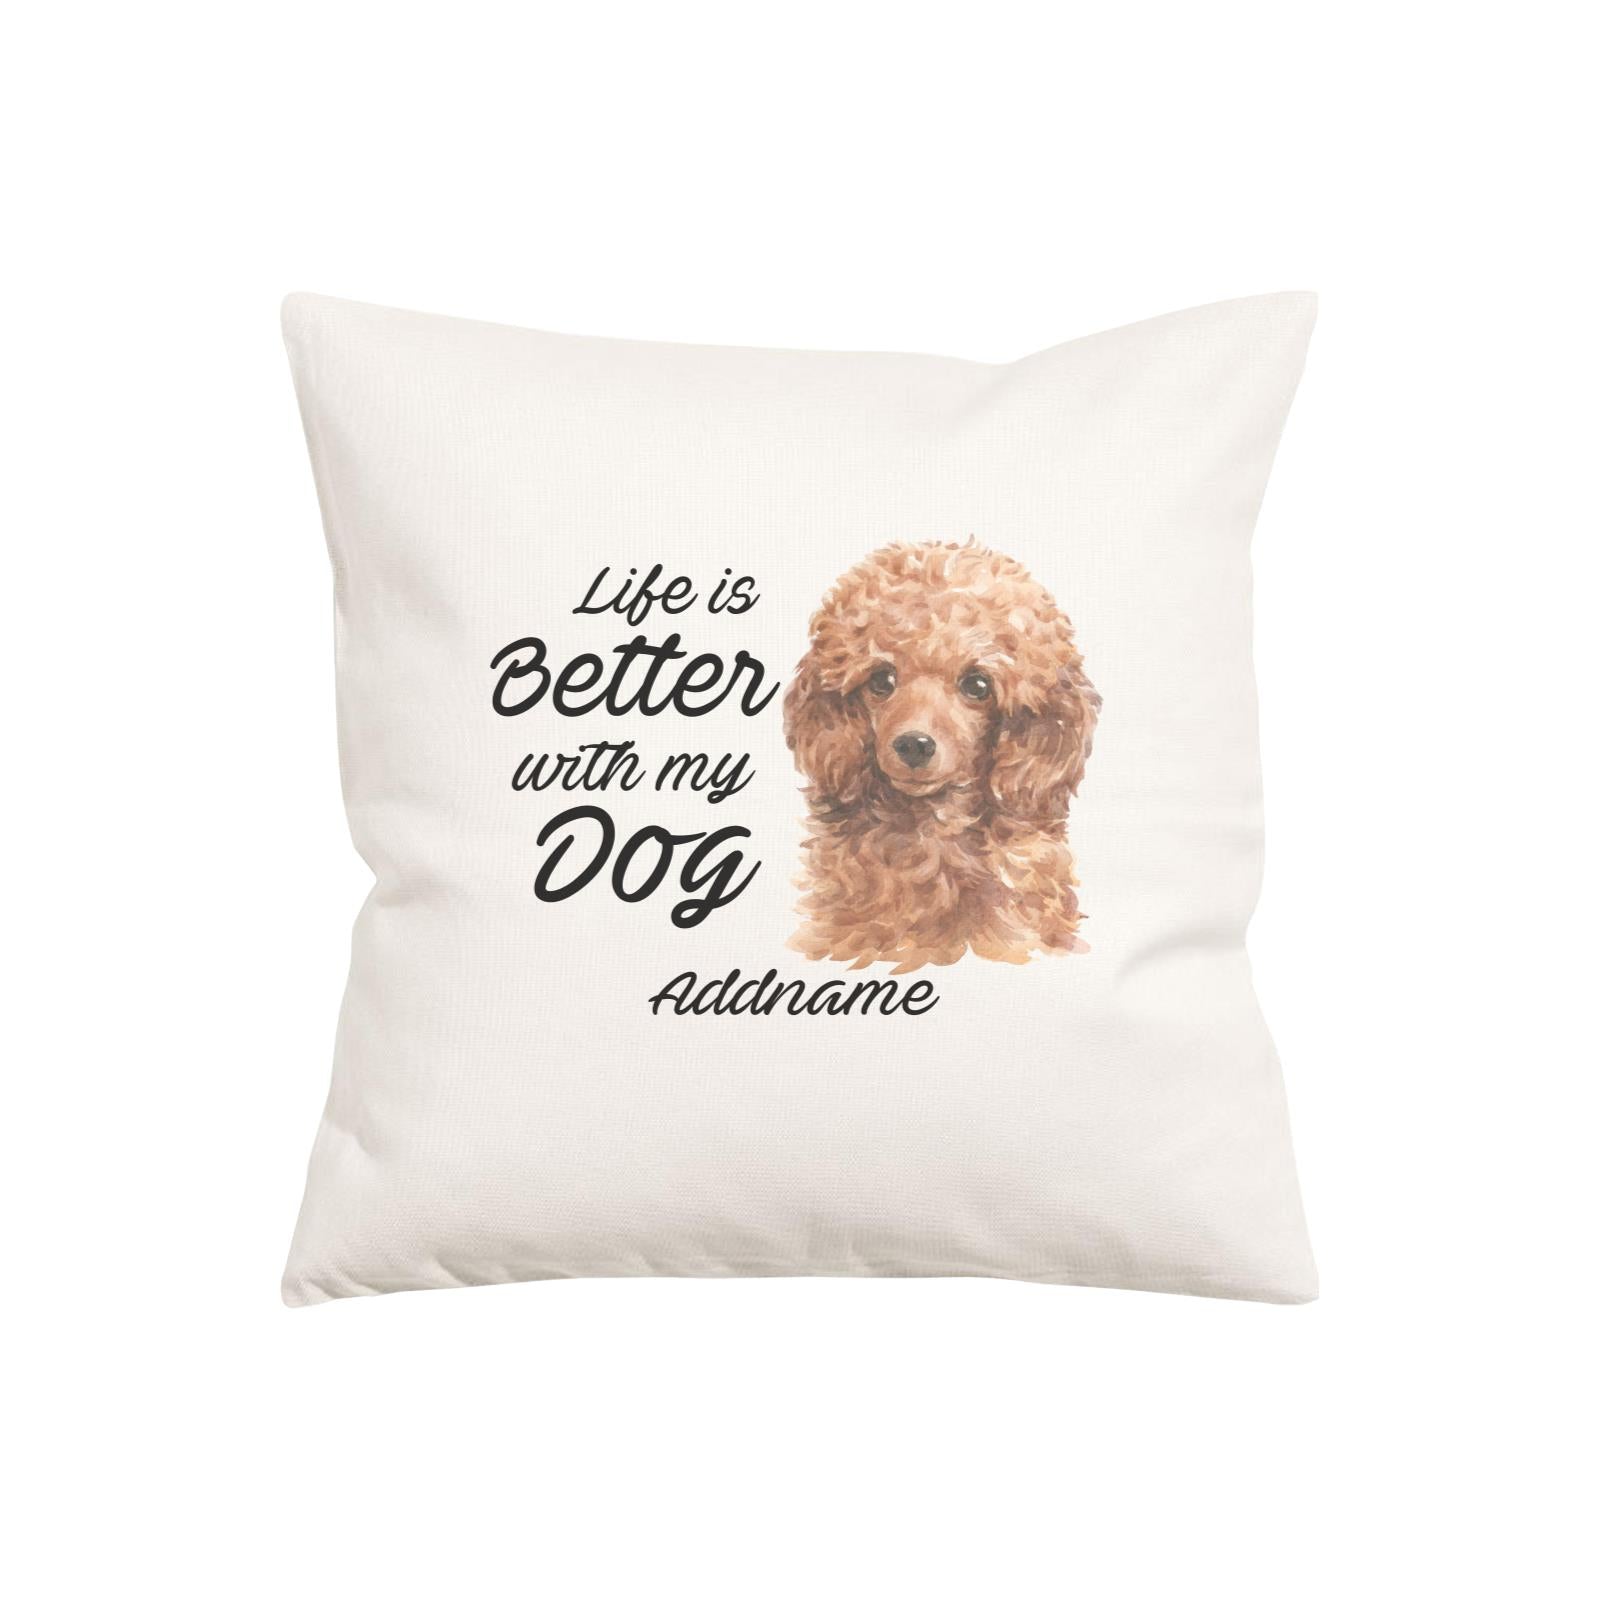 Watercolor Life is Better With My Dog Poodle Brown Addname Pillow Cushion